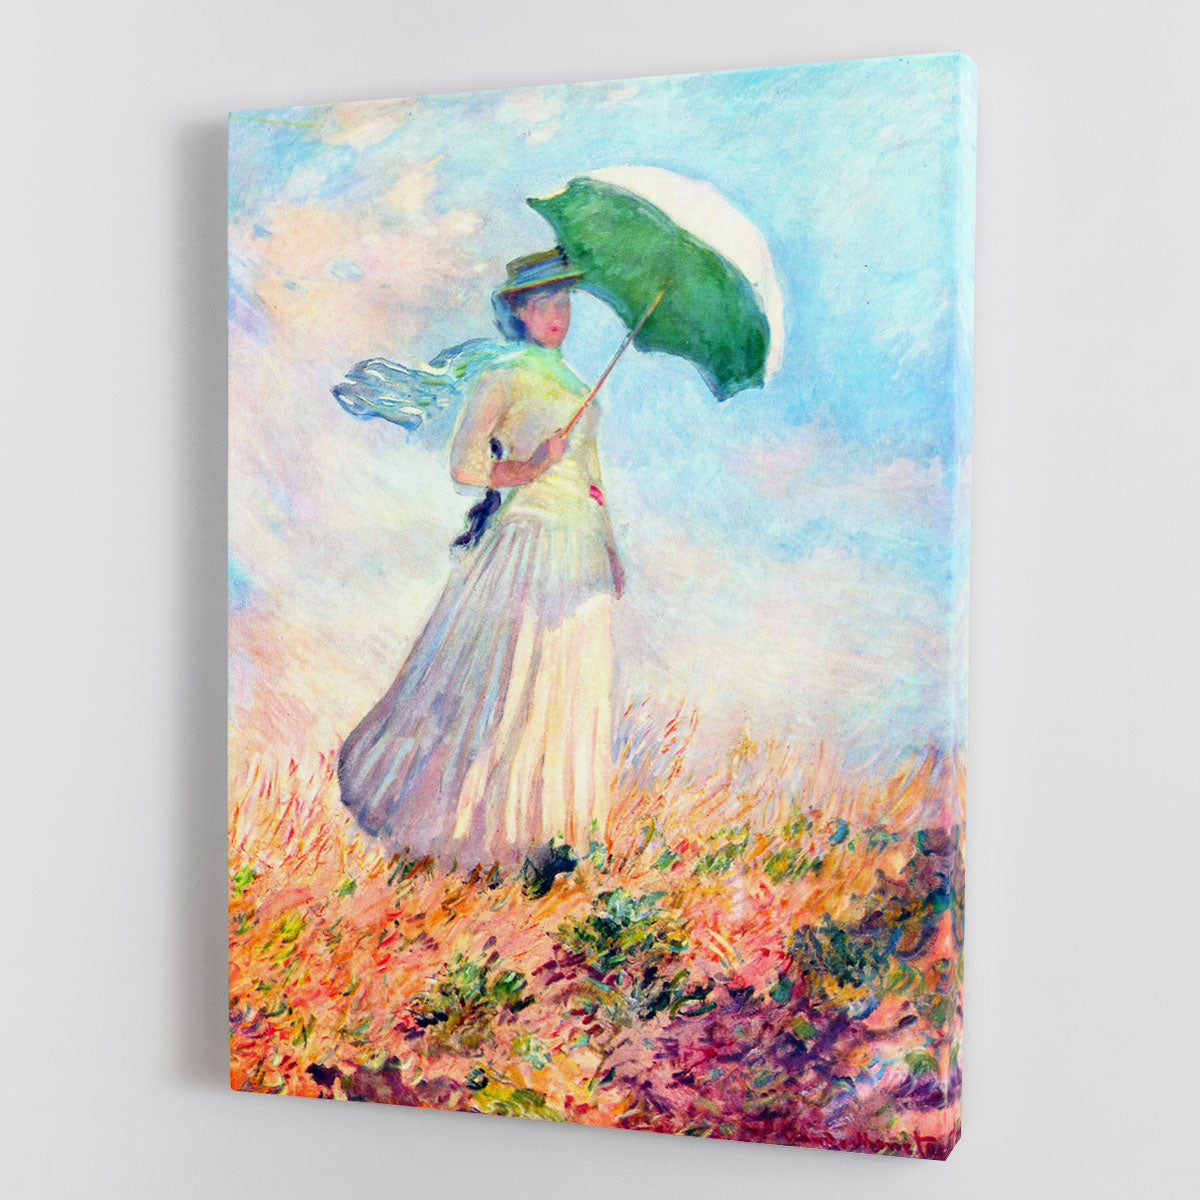 Lady with sunshade study by Monet Canvas Print or Poster - Canvas Art Rocks - 1